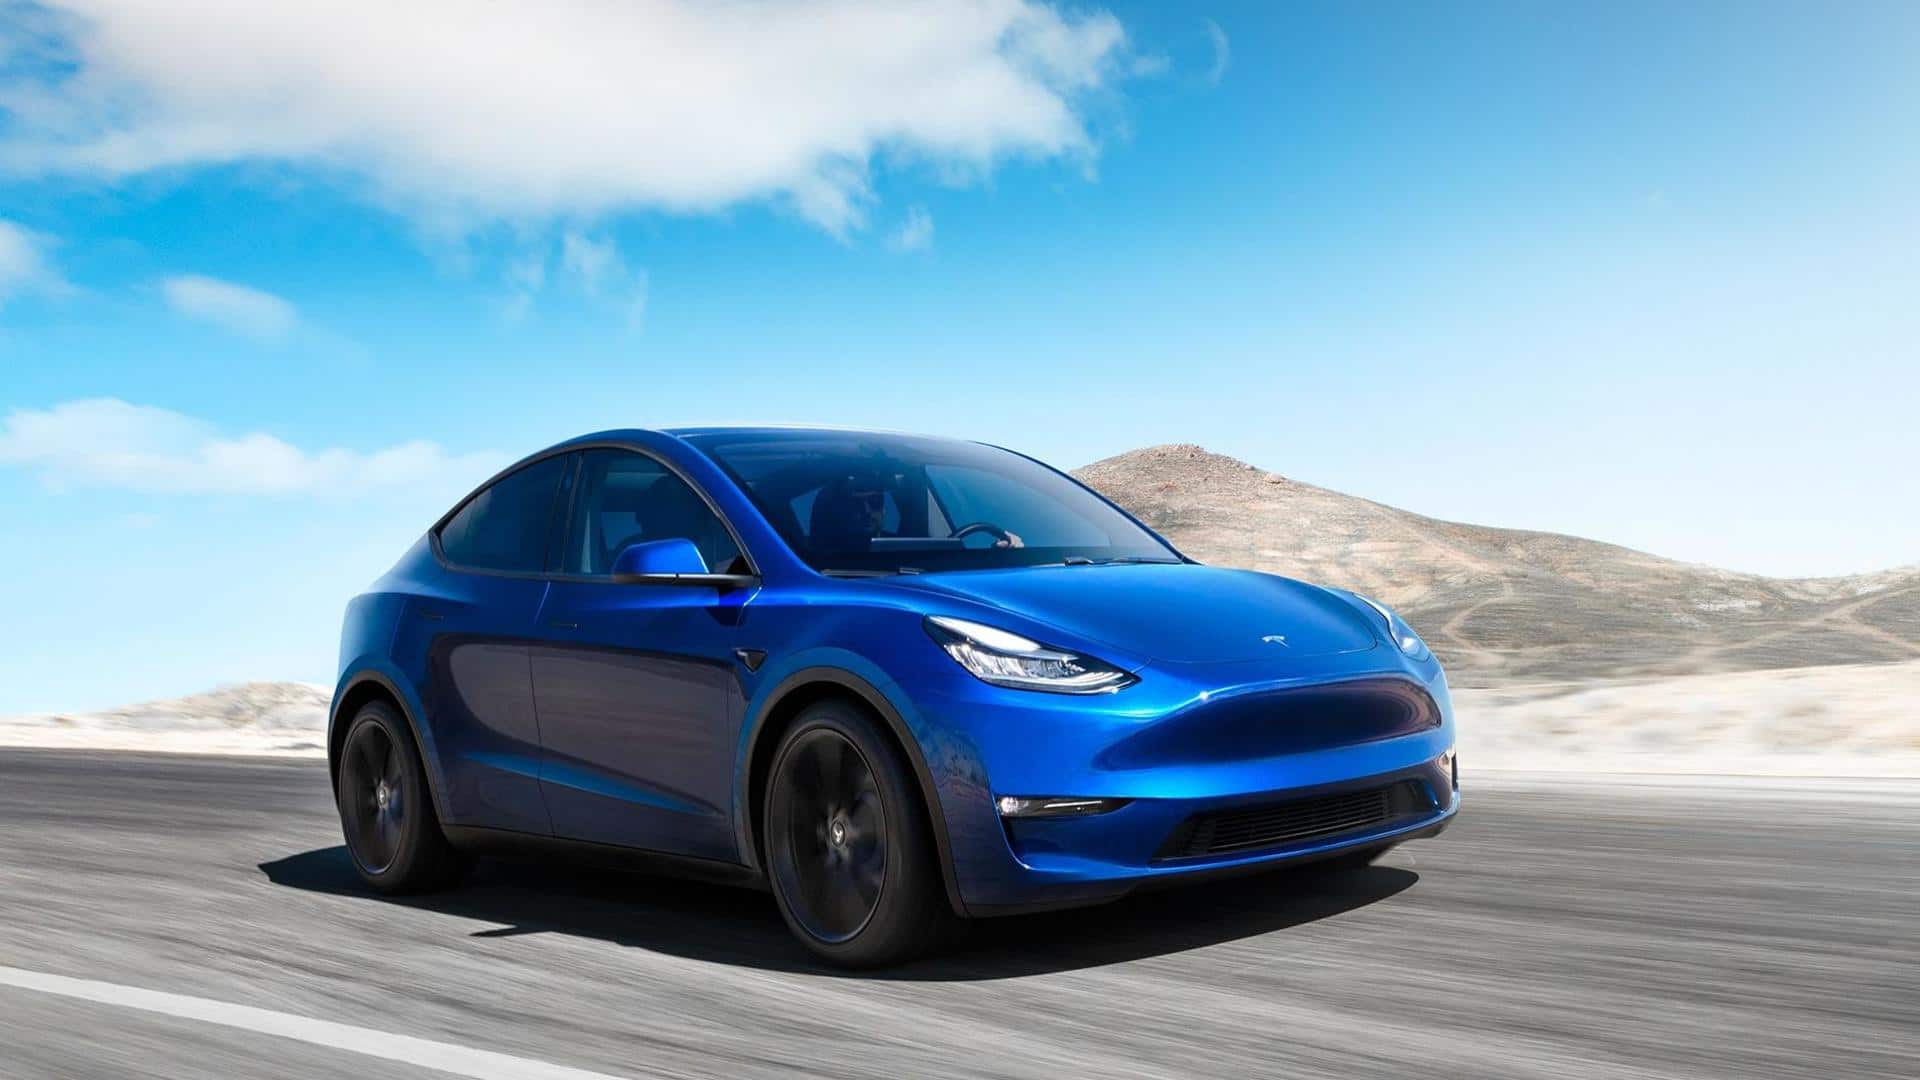 Tesla's first car in India could be Model Y